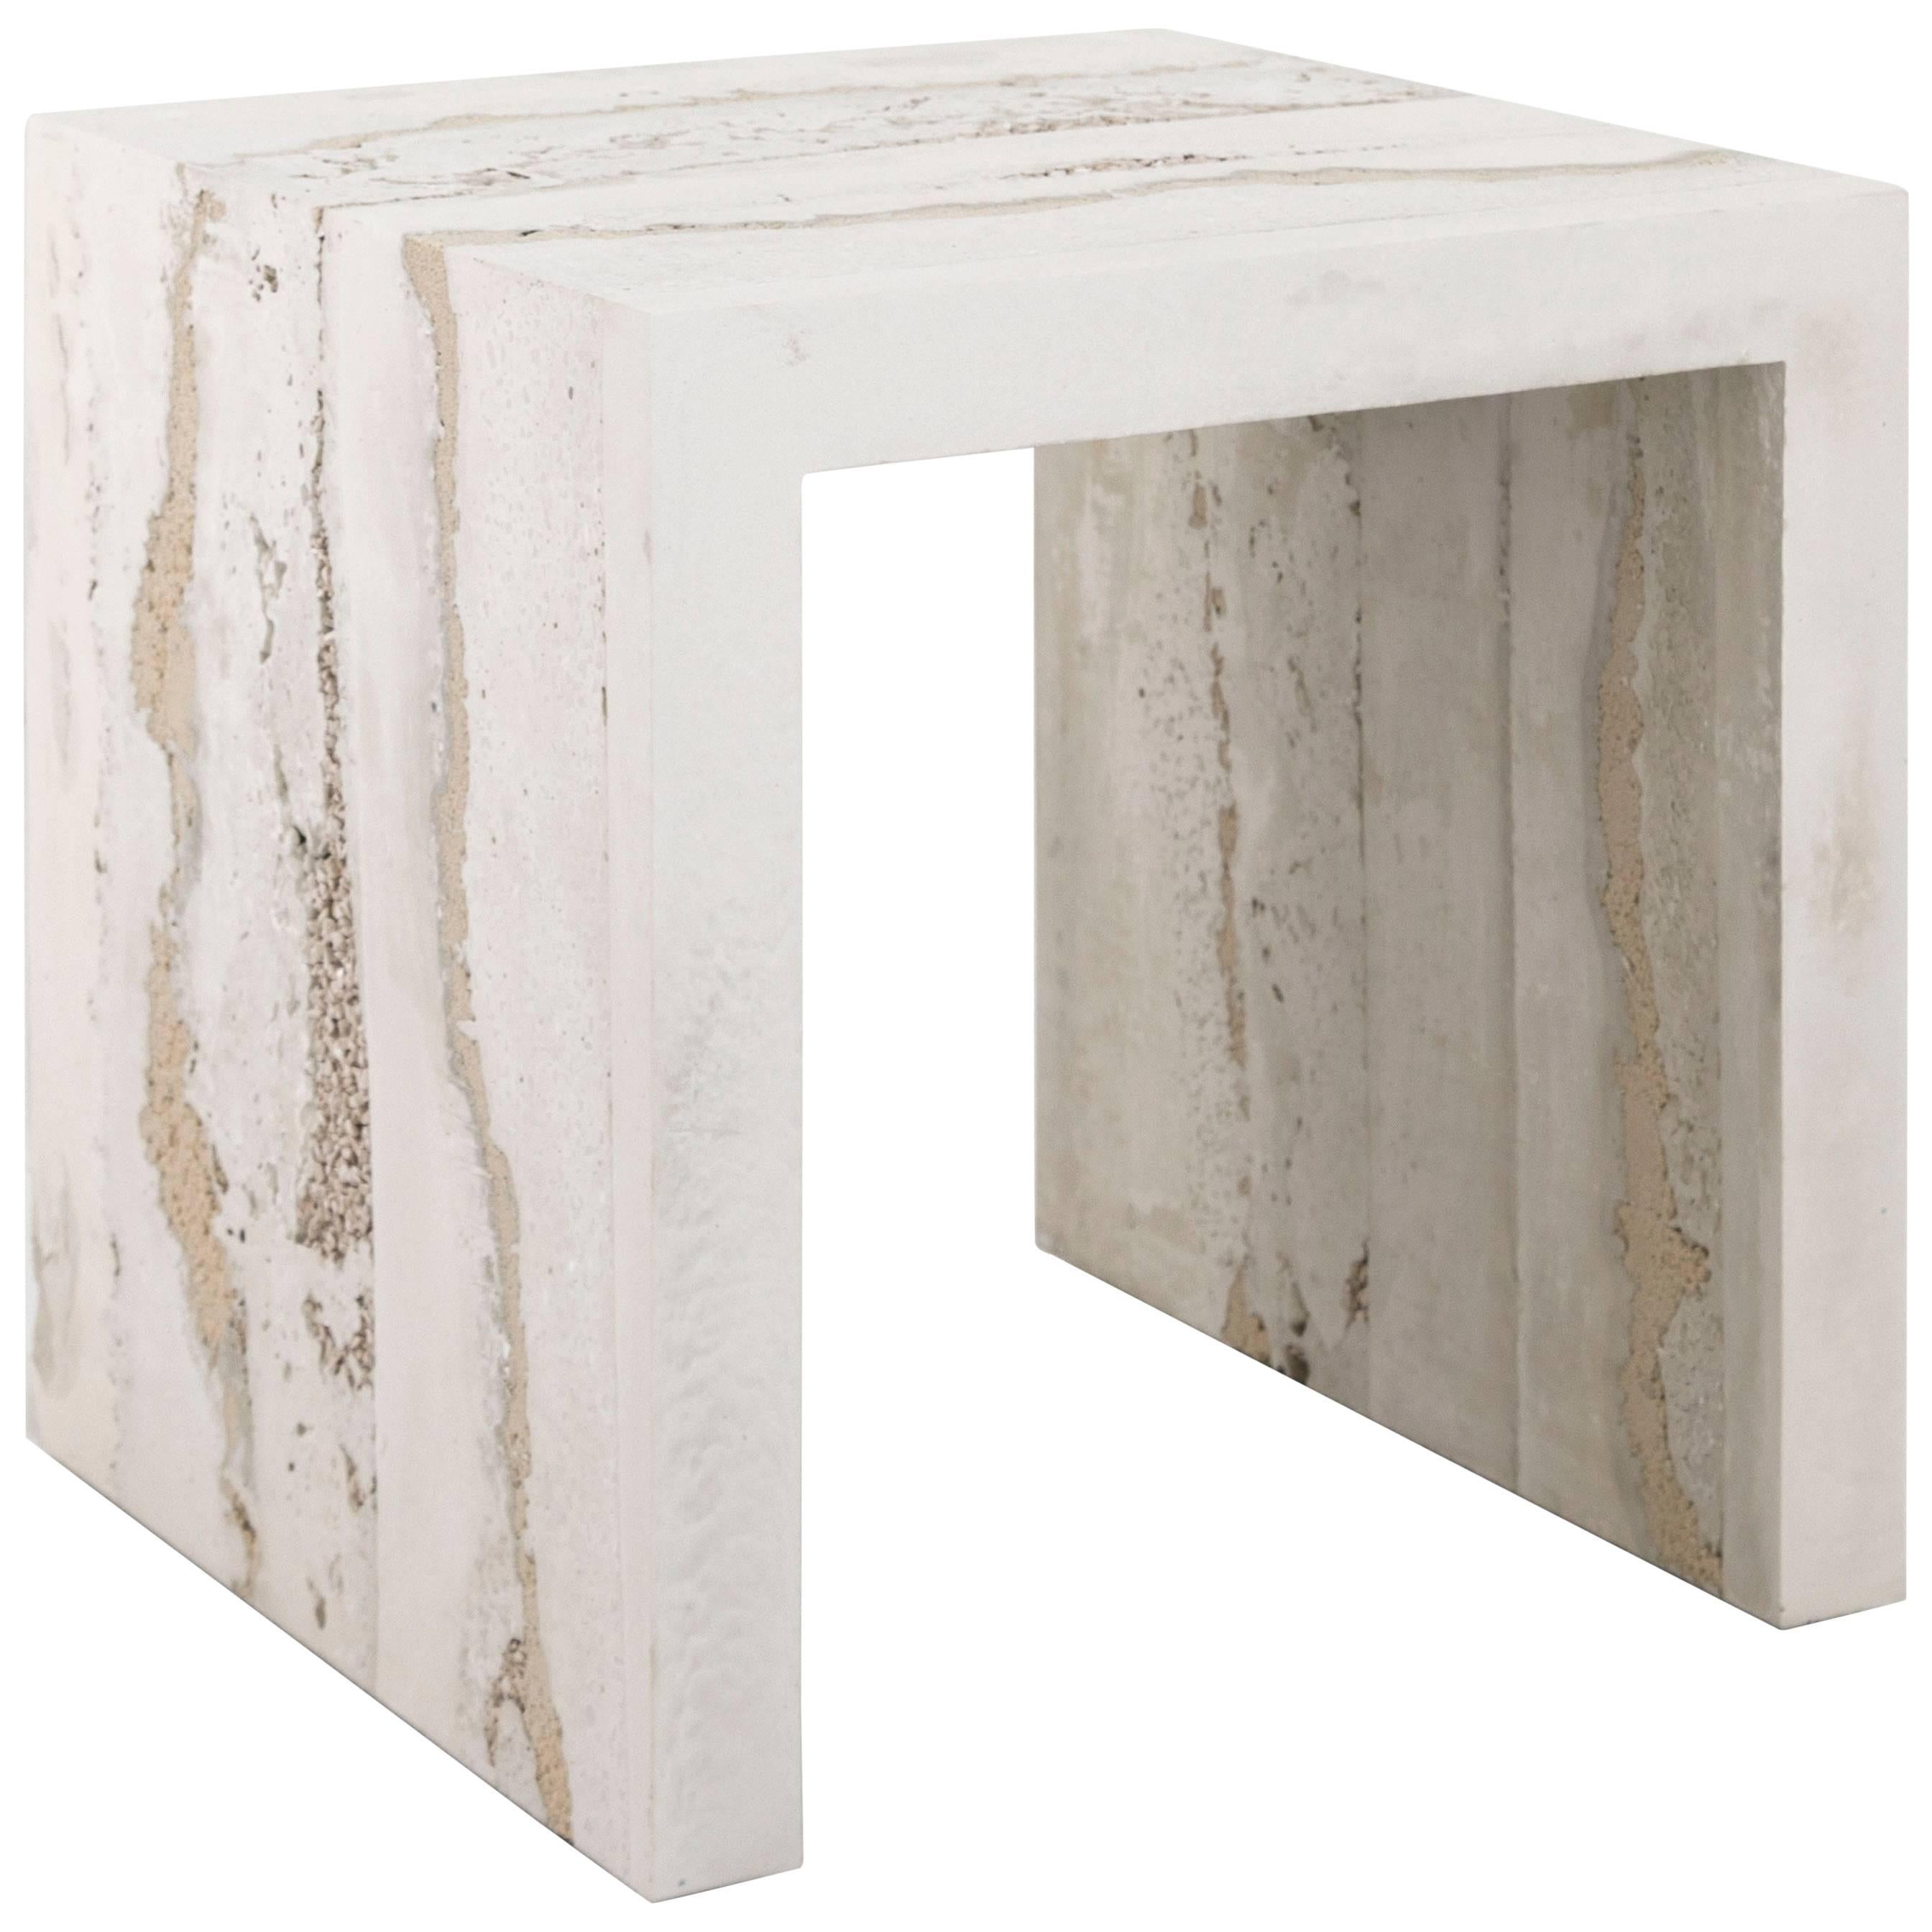 Lithic Side Table, Cream Cement, Porcelain and Tan Sand by Fernando Mastrangelo